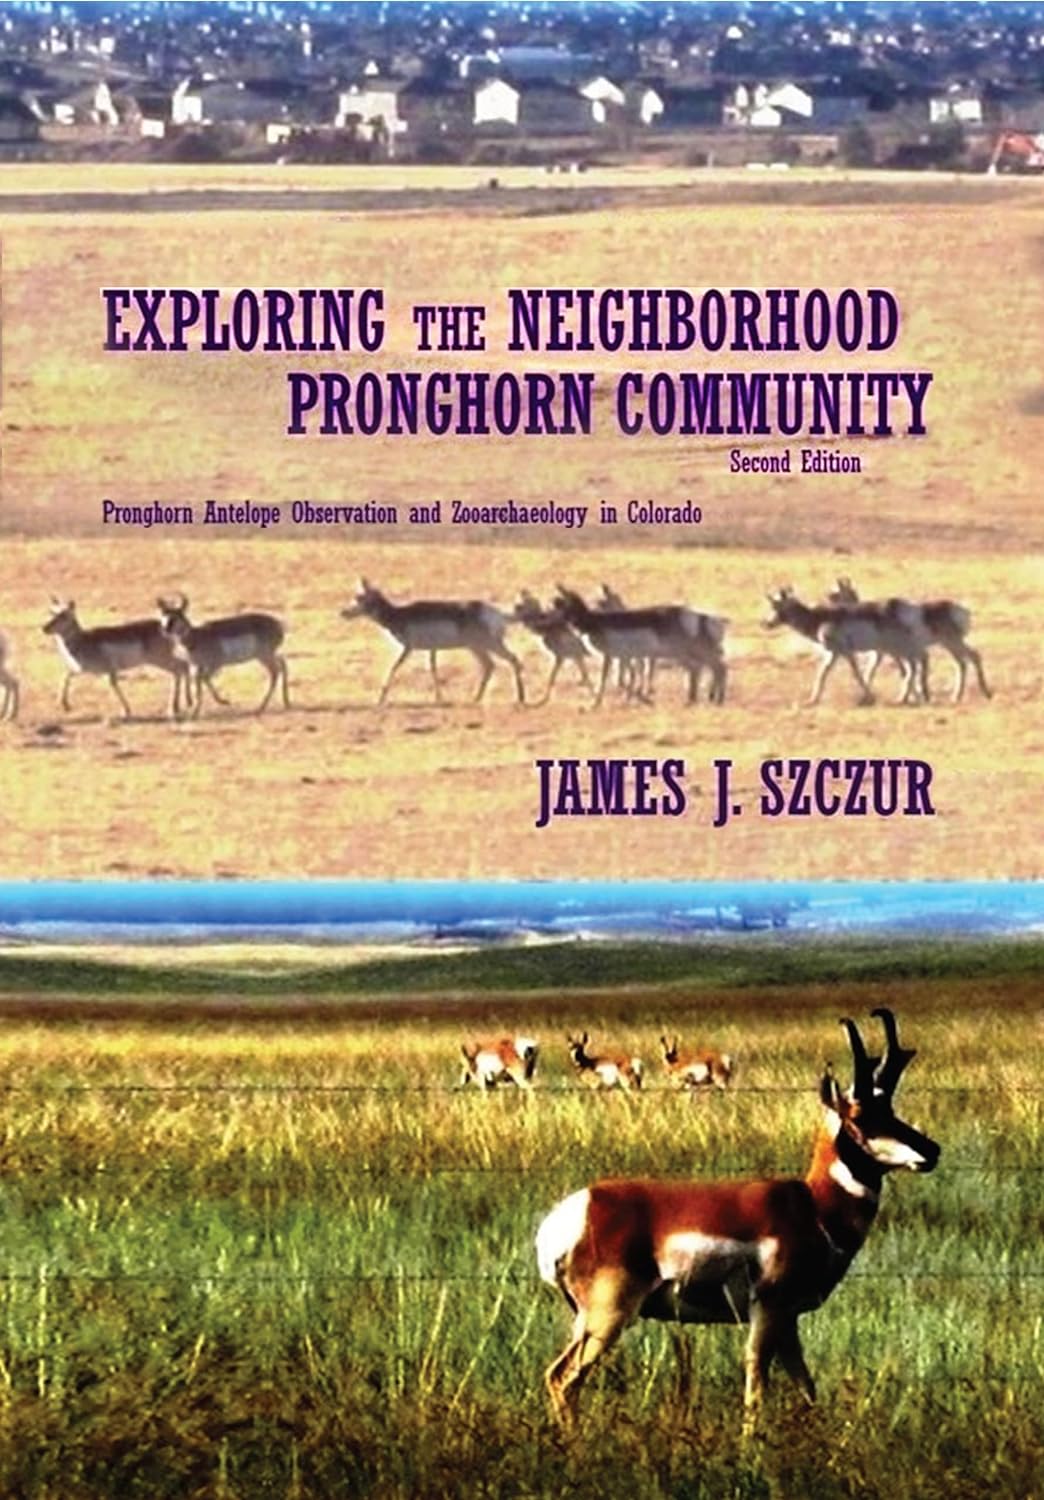 Exploring the Colorado Wilderness: A Unique Pronghorn Adventure Unveiled in New Book